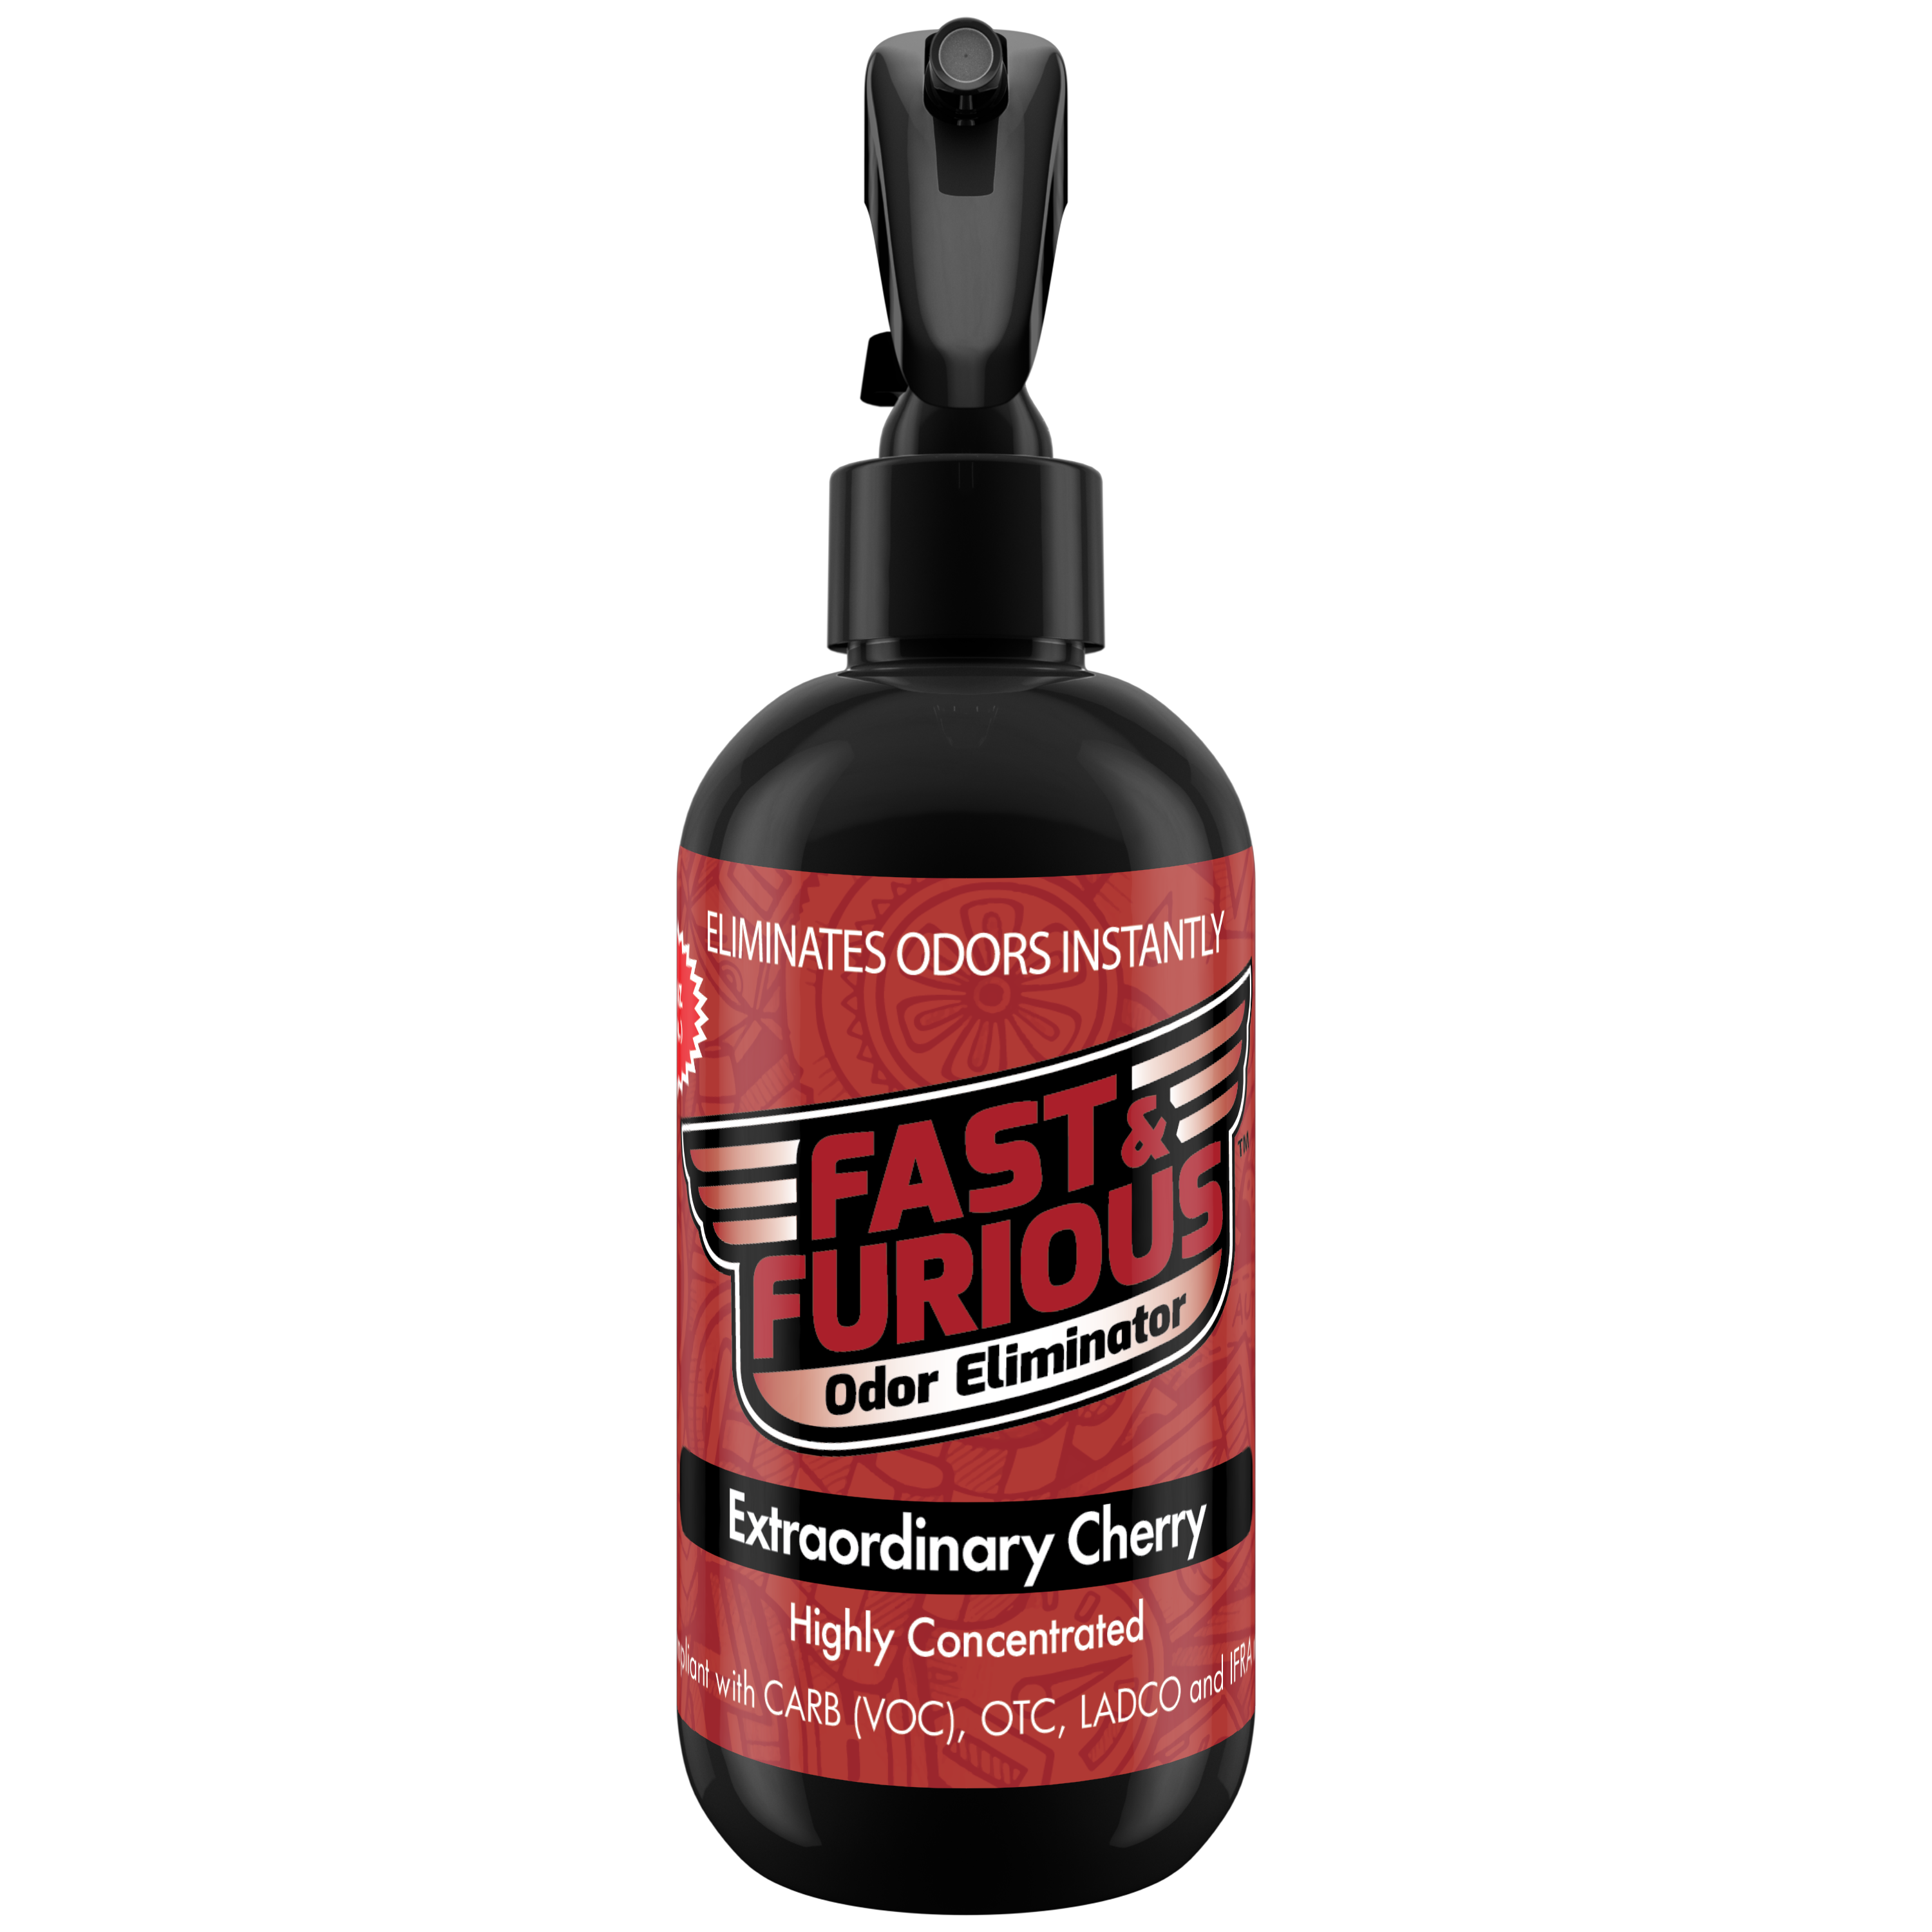 Fast and Furious Odor Eliminator - Extraordinary Cherry Scent